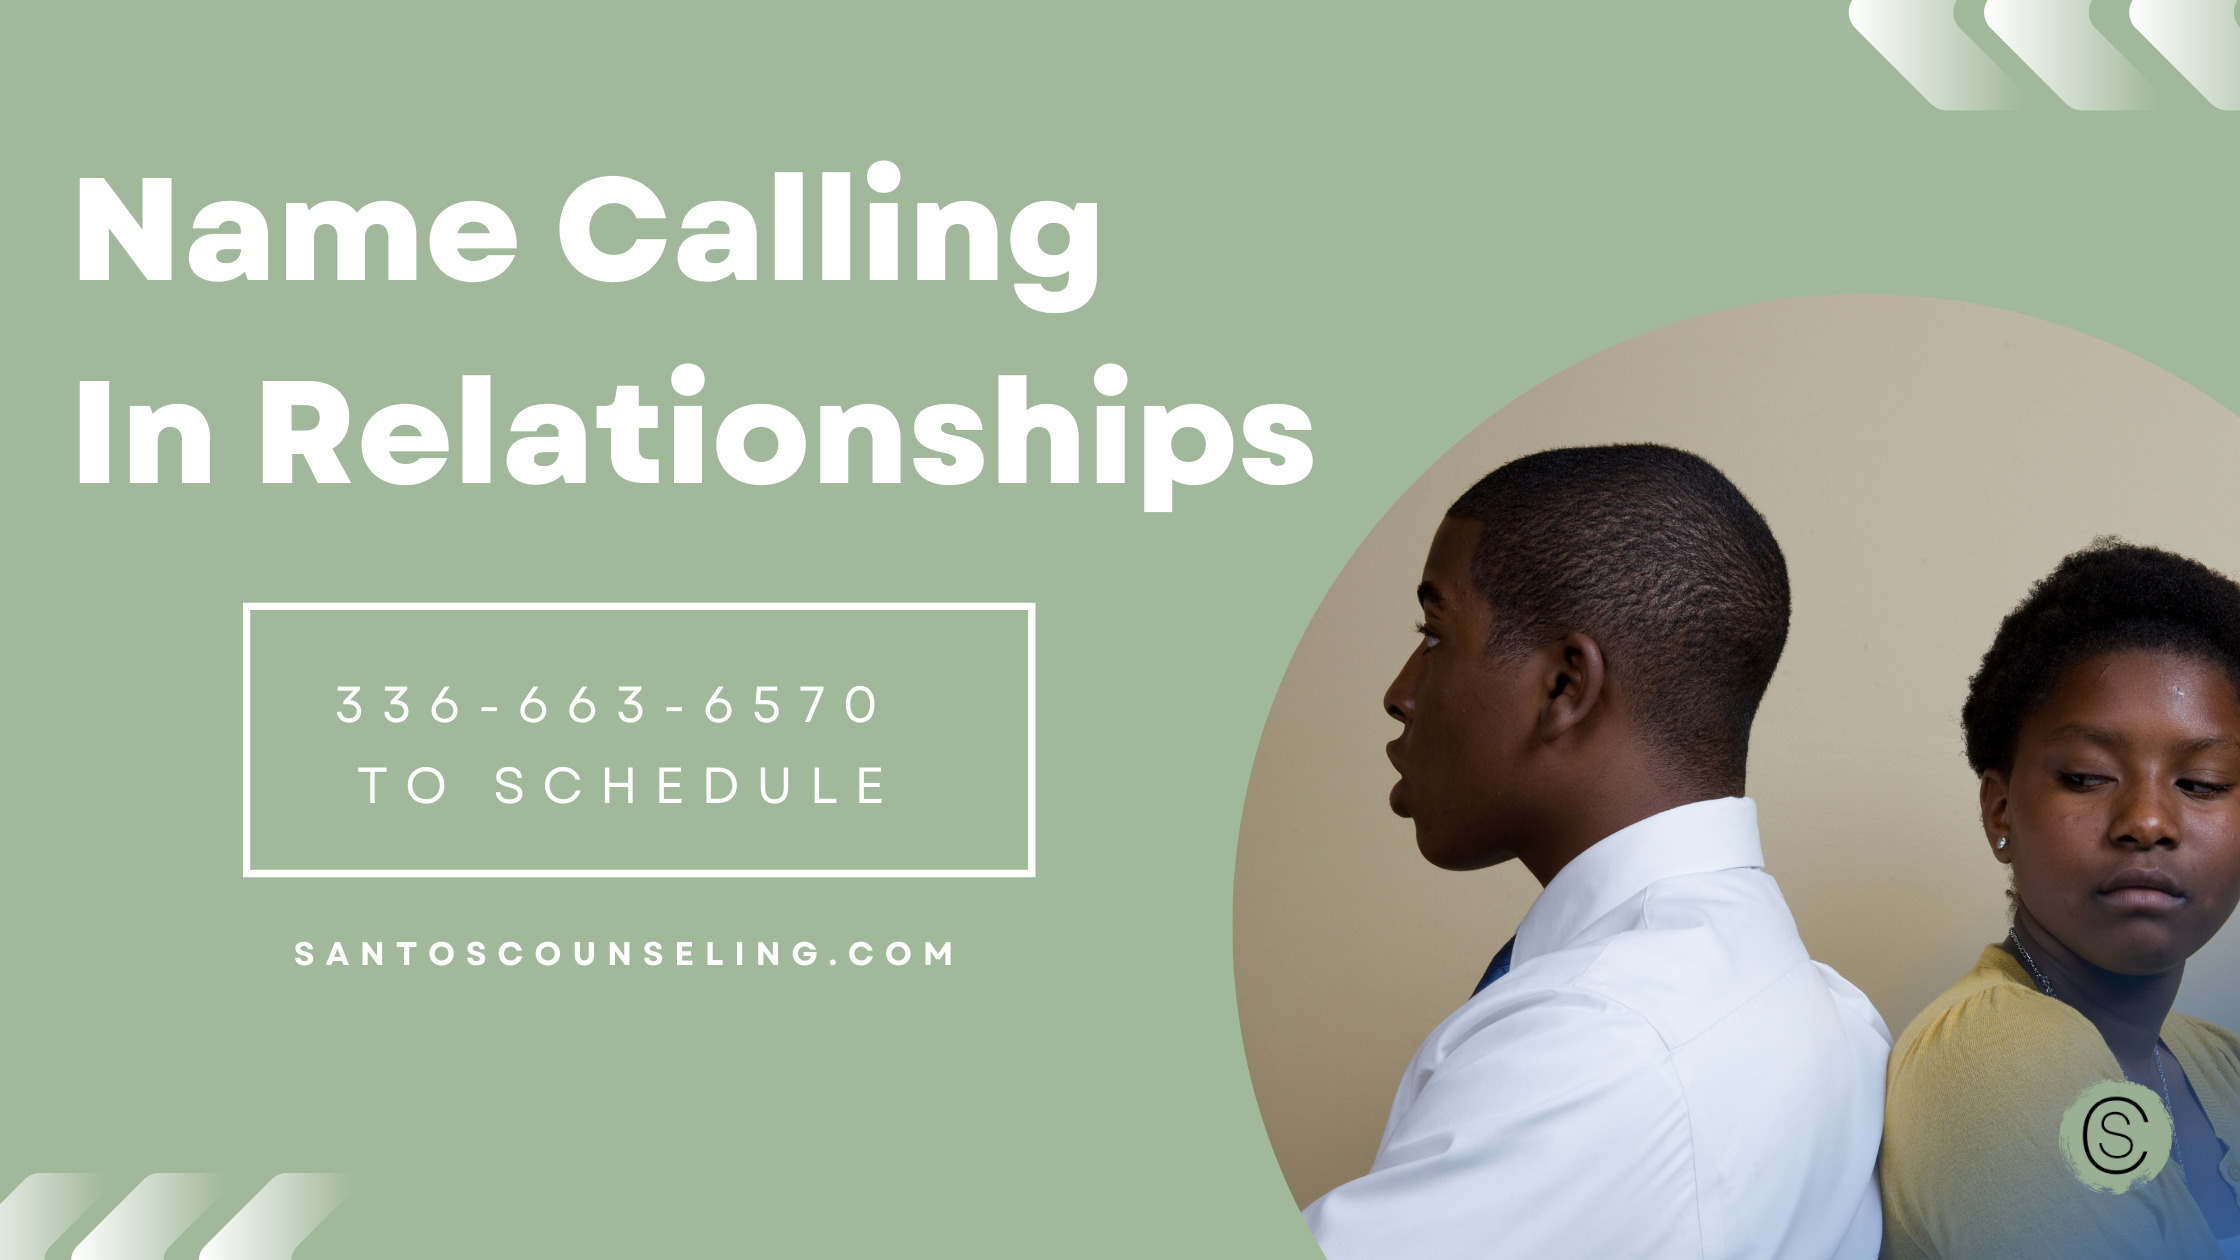 Calling Names In A Relationship And How Name-Calling Can Be Damaging To Your Life & Relationship. Learn The Psychological Impact Of Name Calling. Greensboro, NC